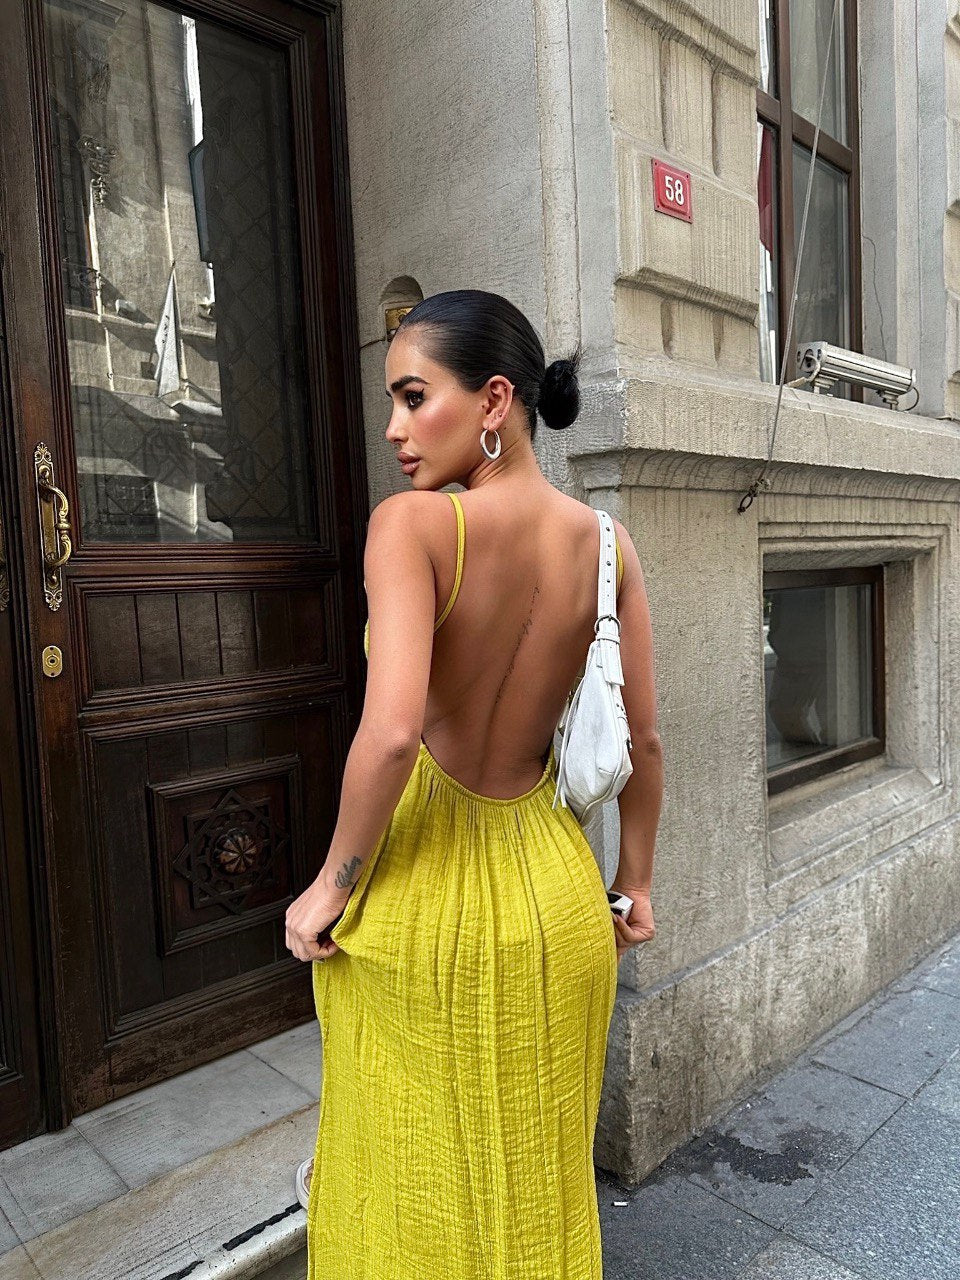 Enigmatic Backless Beauty